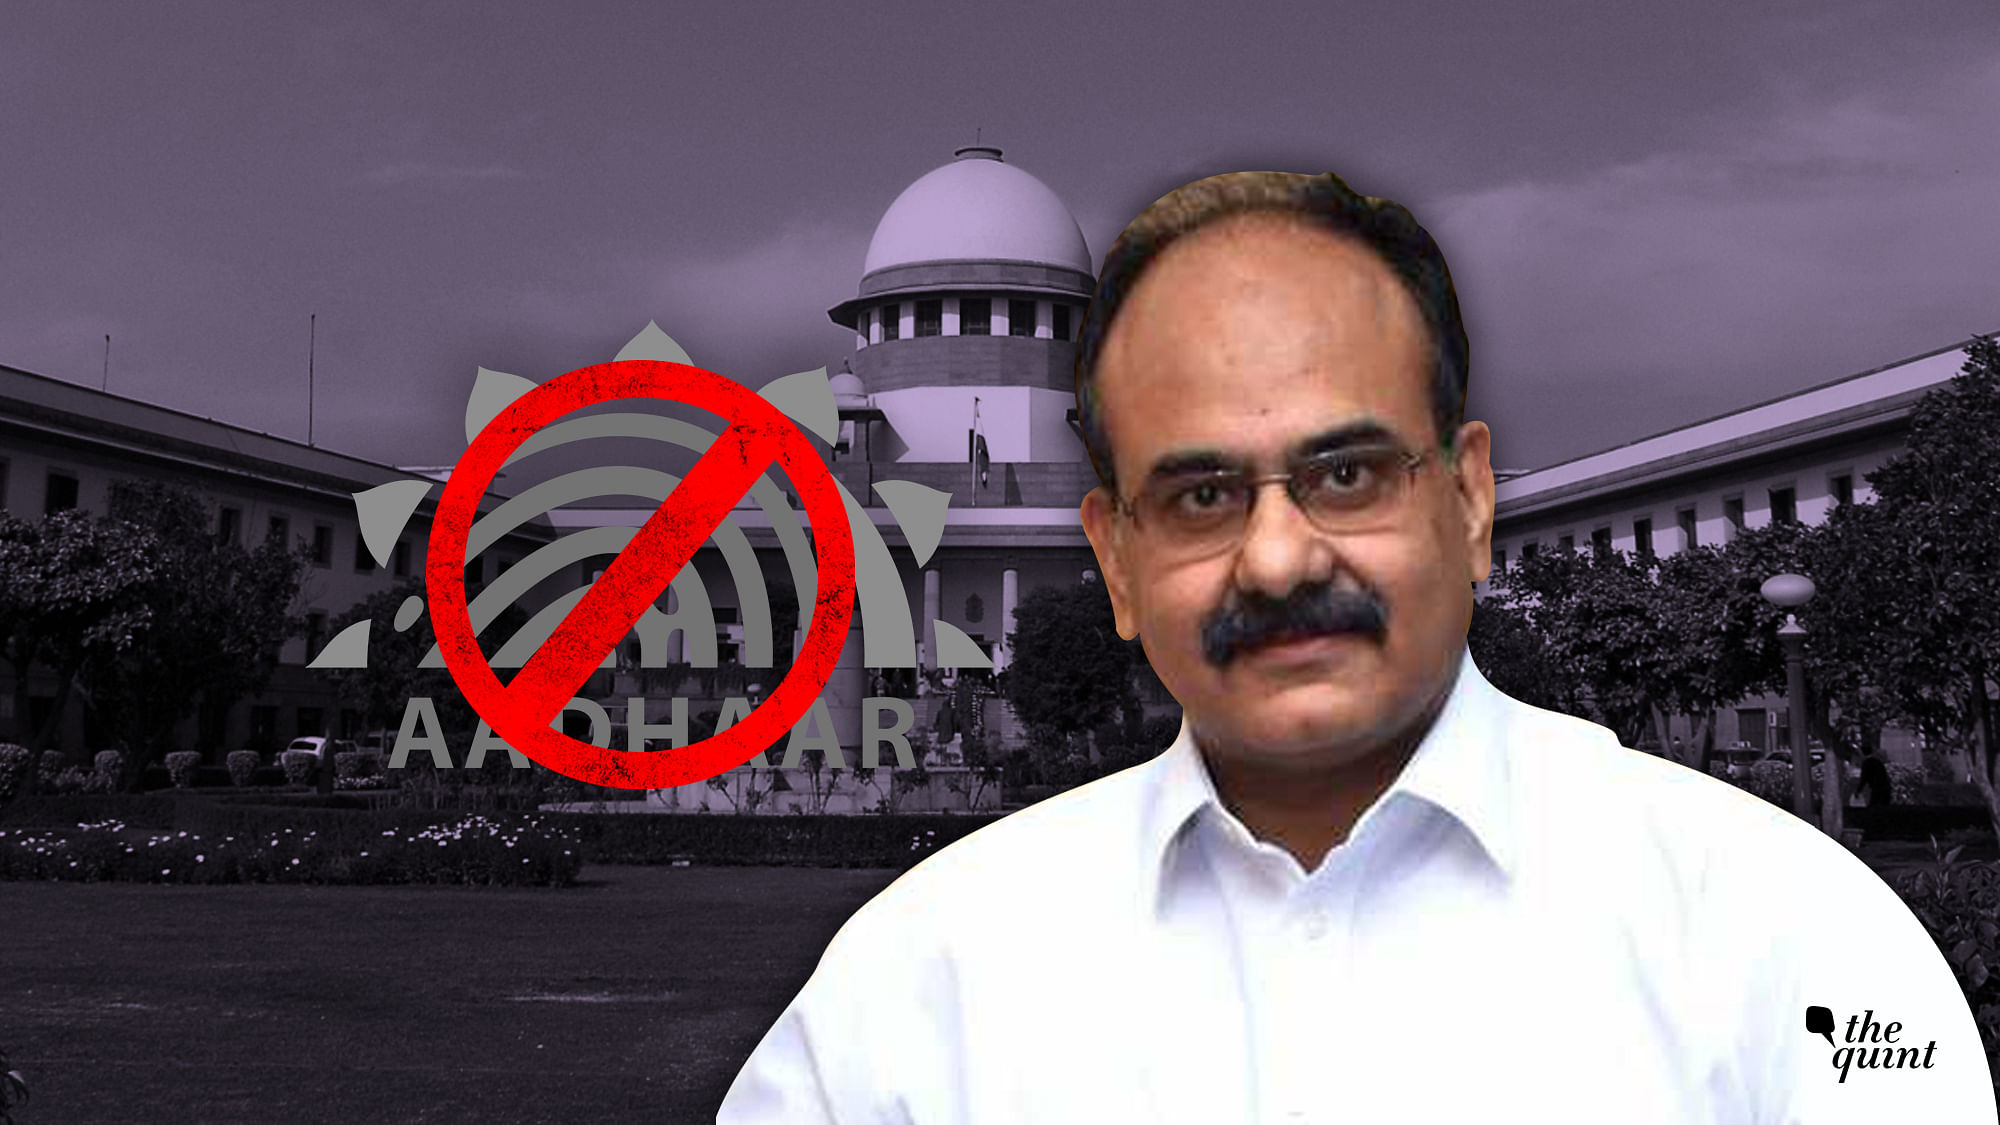 Ajay Bhushan Pandey, CEO of the UIDAI, gave an interview to the Hindustan Times in which he claimed that Aadhaar was still needed when applying for new tatkaal passports, despite the Supreme Court order which expressly countered this.